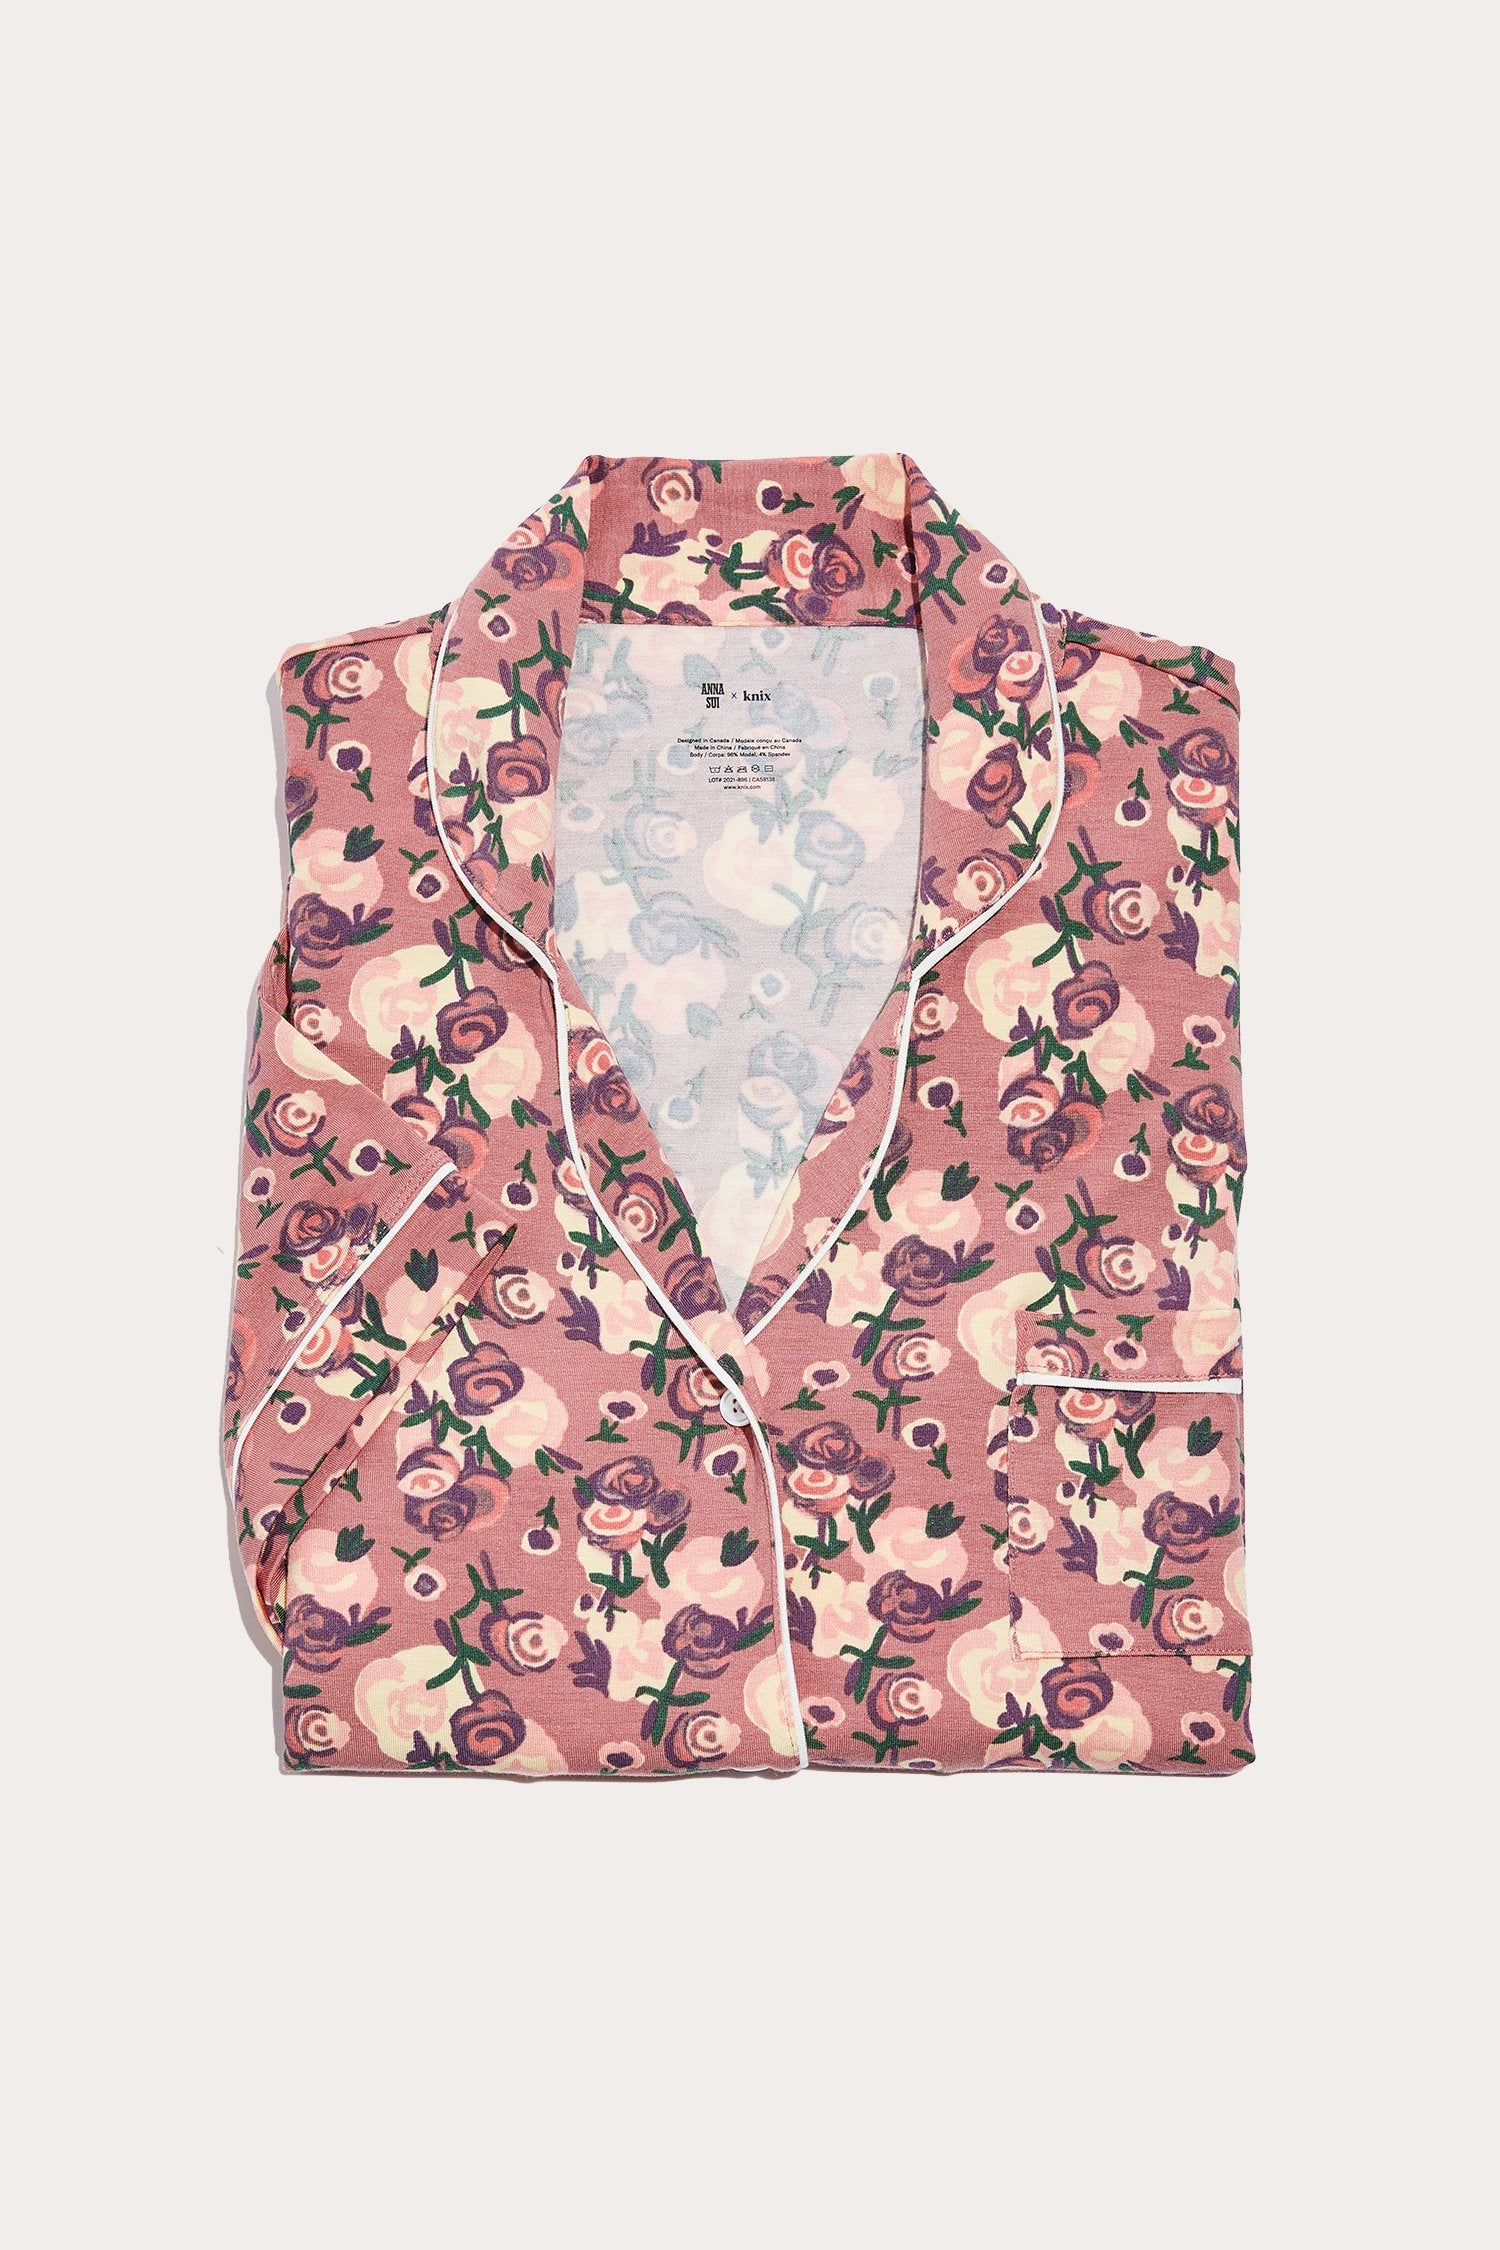 Anna Sui x Knix Rose Bouquet Sleep Top, on a dark rose, pattern of light and darkener pink roses with green 